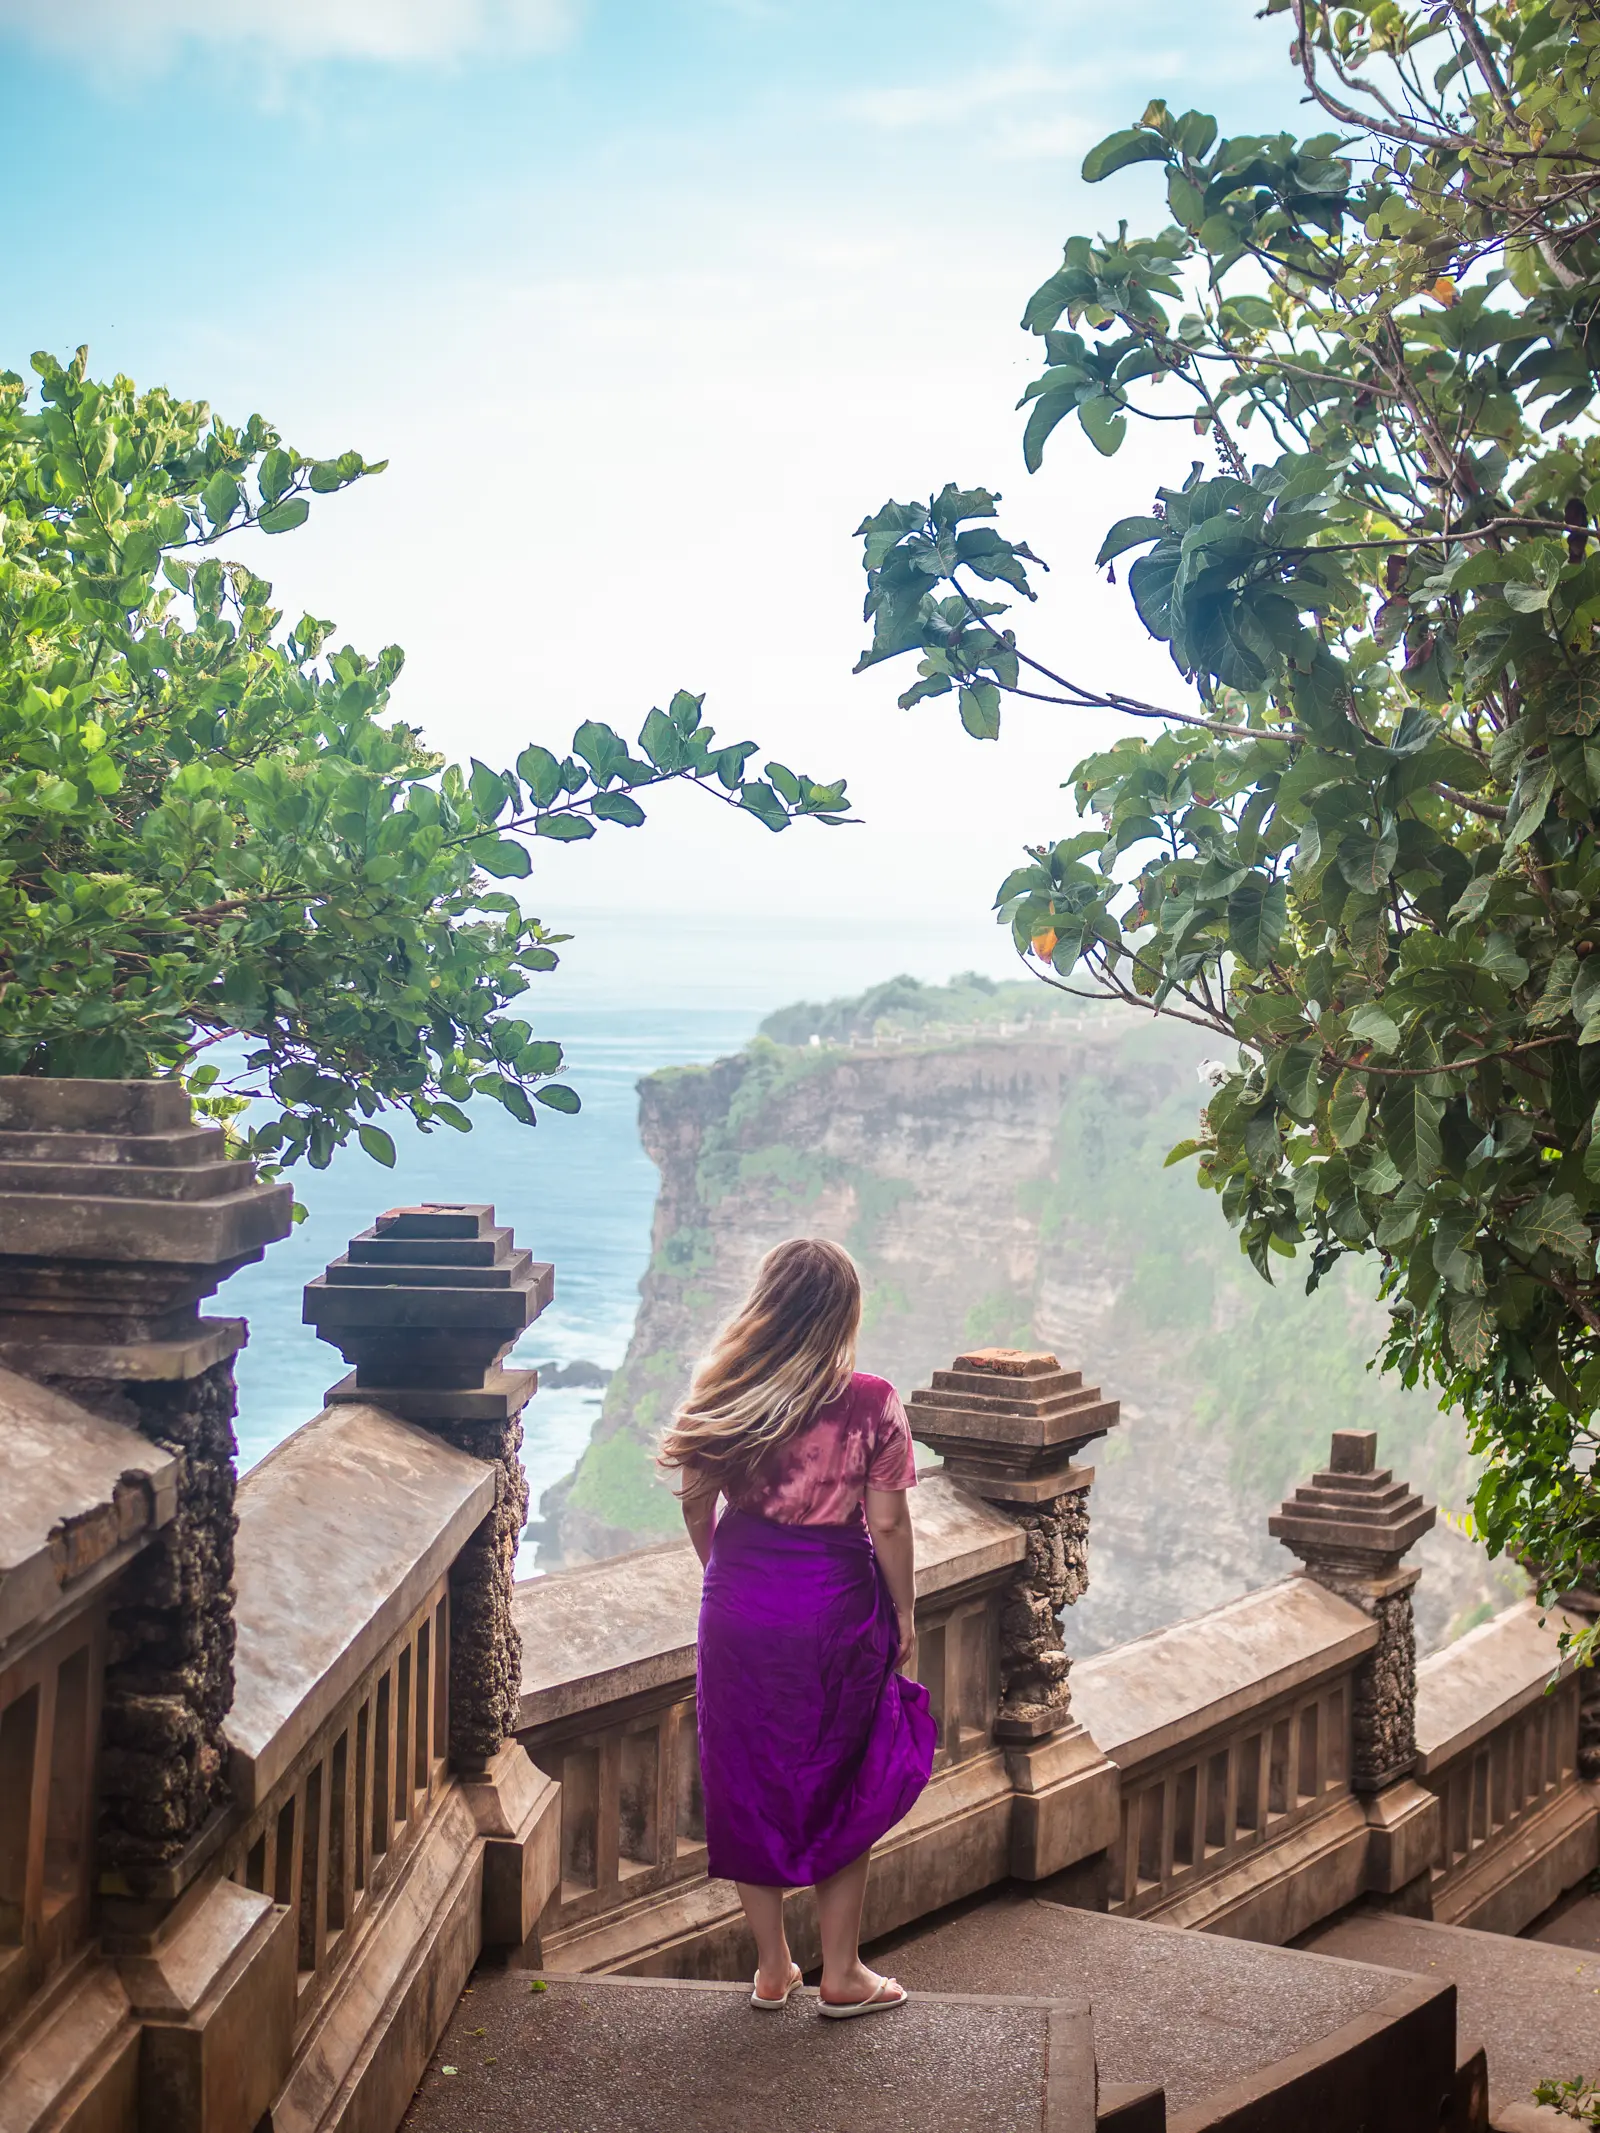 Girl with long hair wearing purple sarong walking down stairs on the edge of Uluwatu Temple in Bali looking out over the ocean and cliffs.